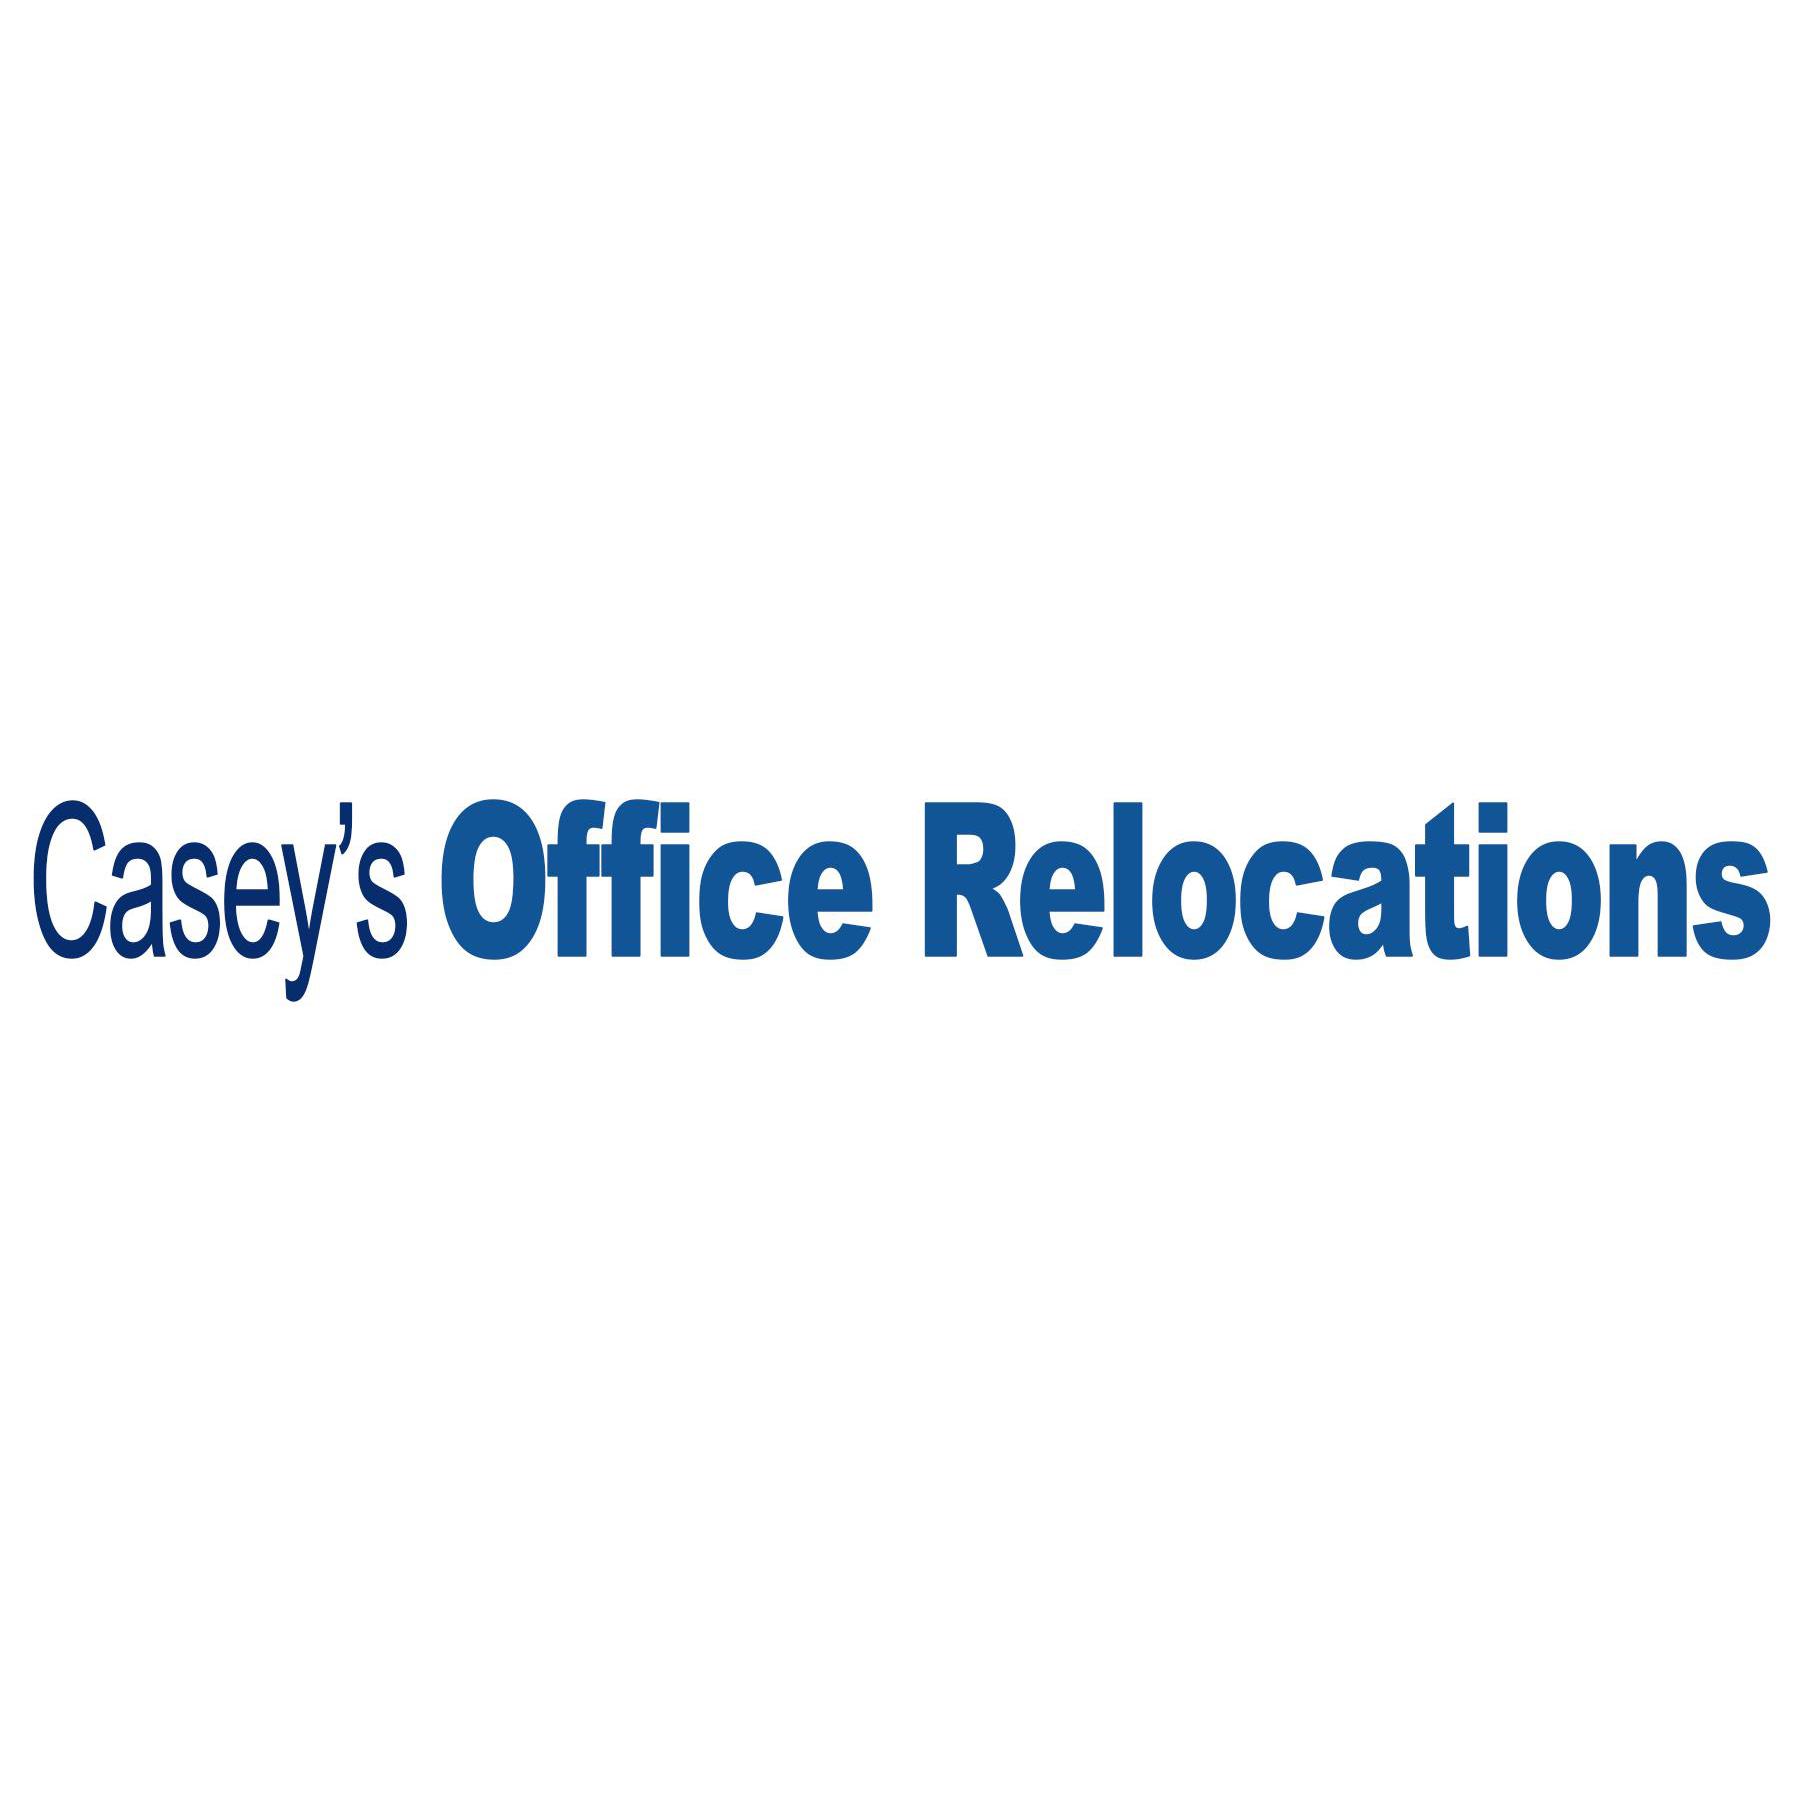 Casey's Office Relocations - London, London W1K 1QW - 08006 335932 | ShowMeLocal.com